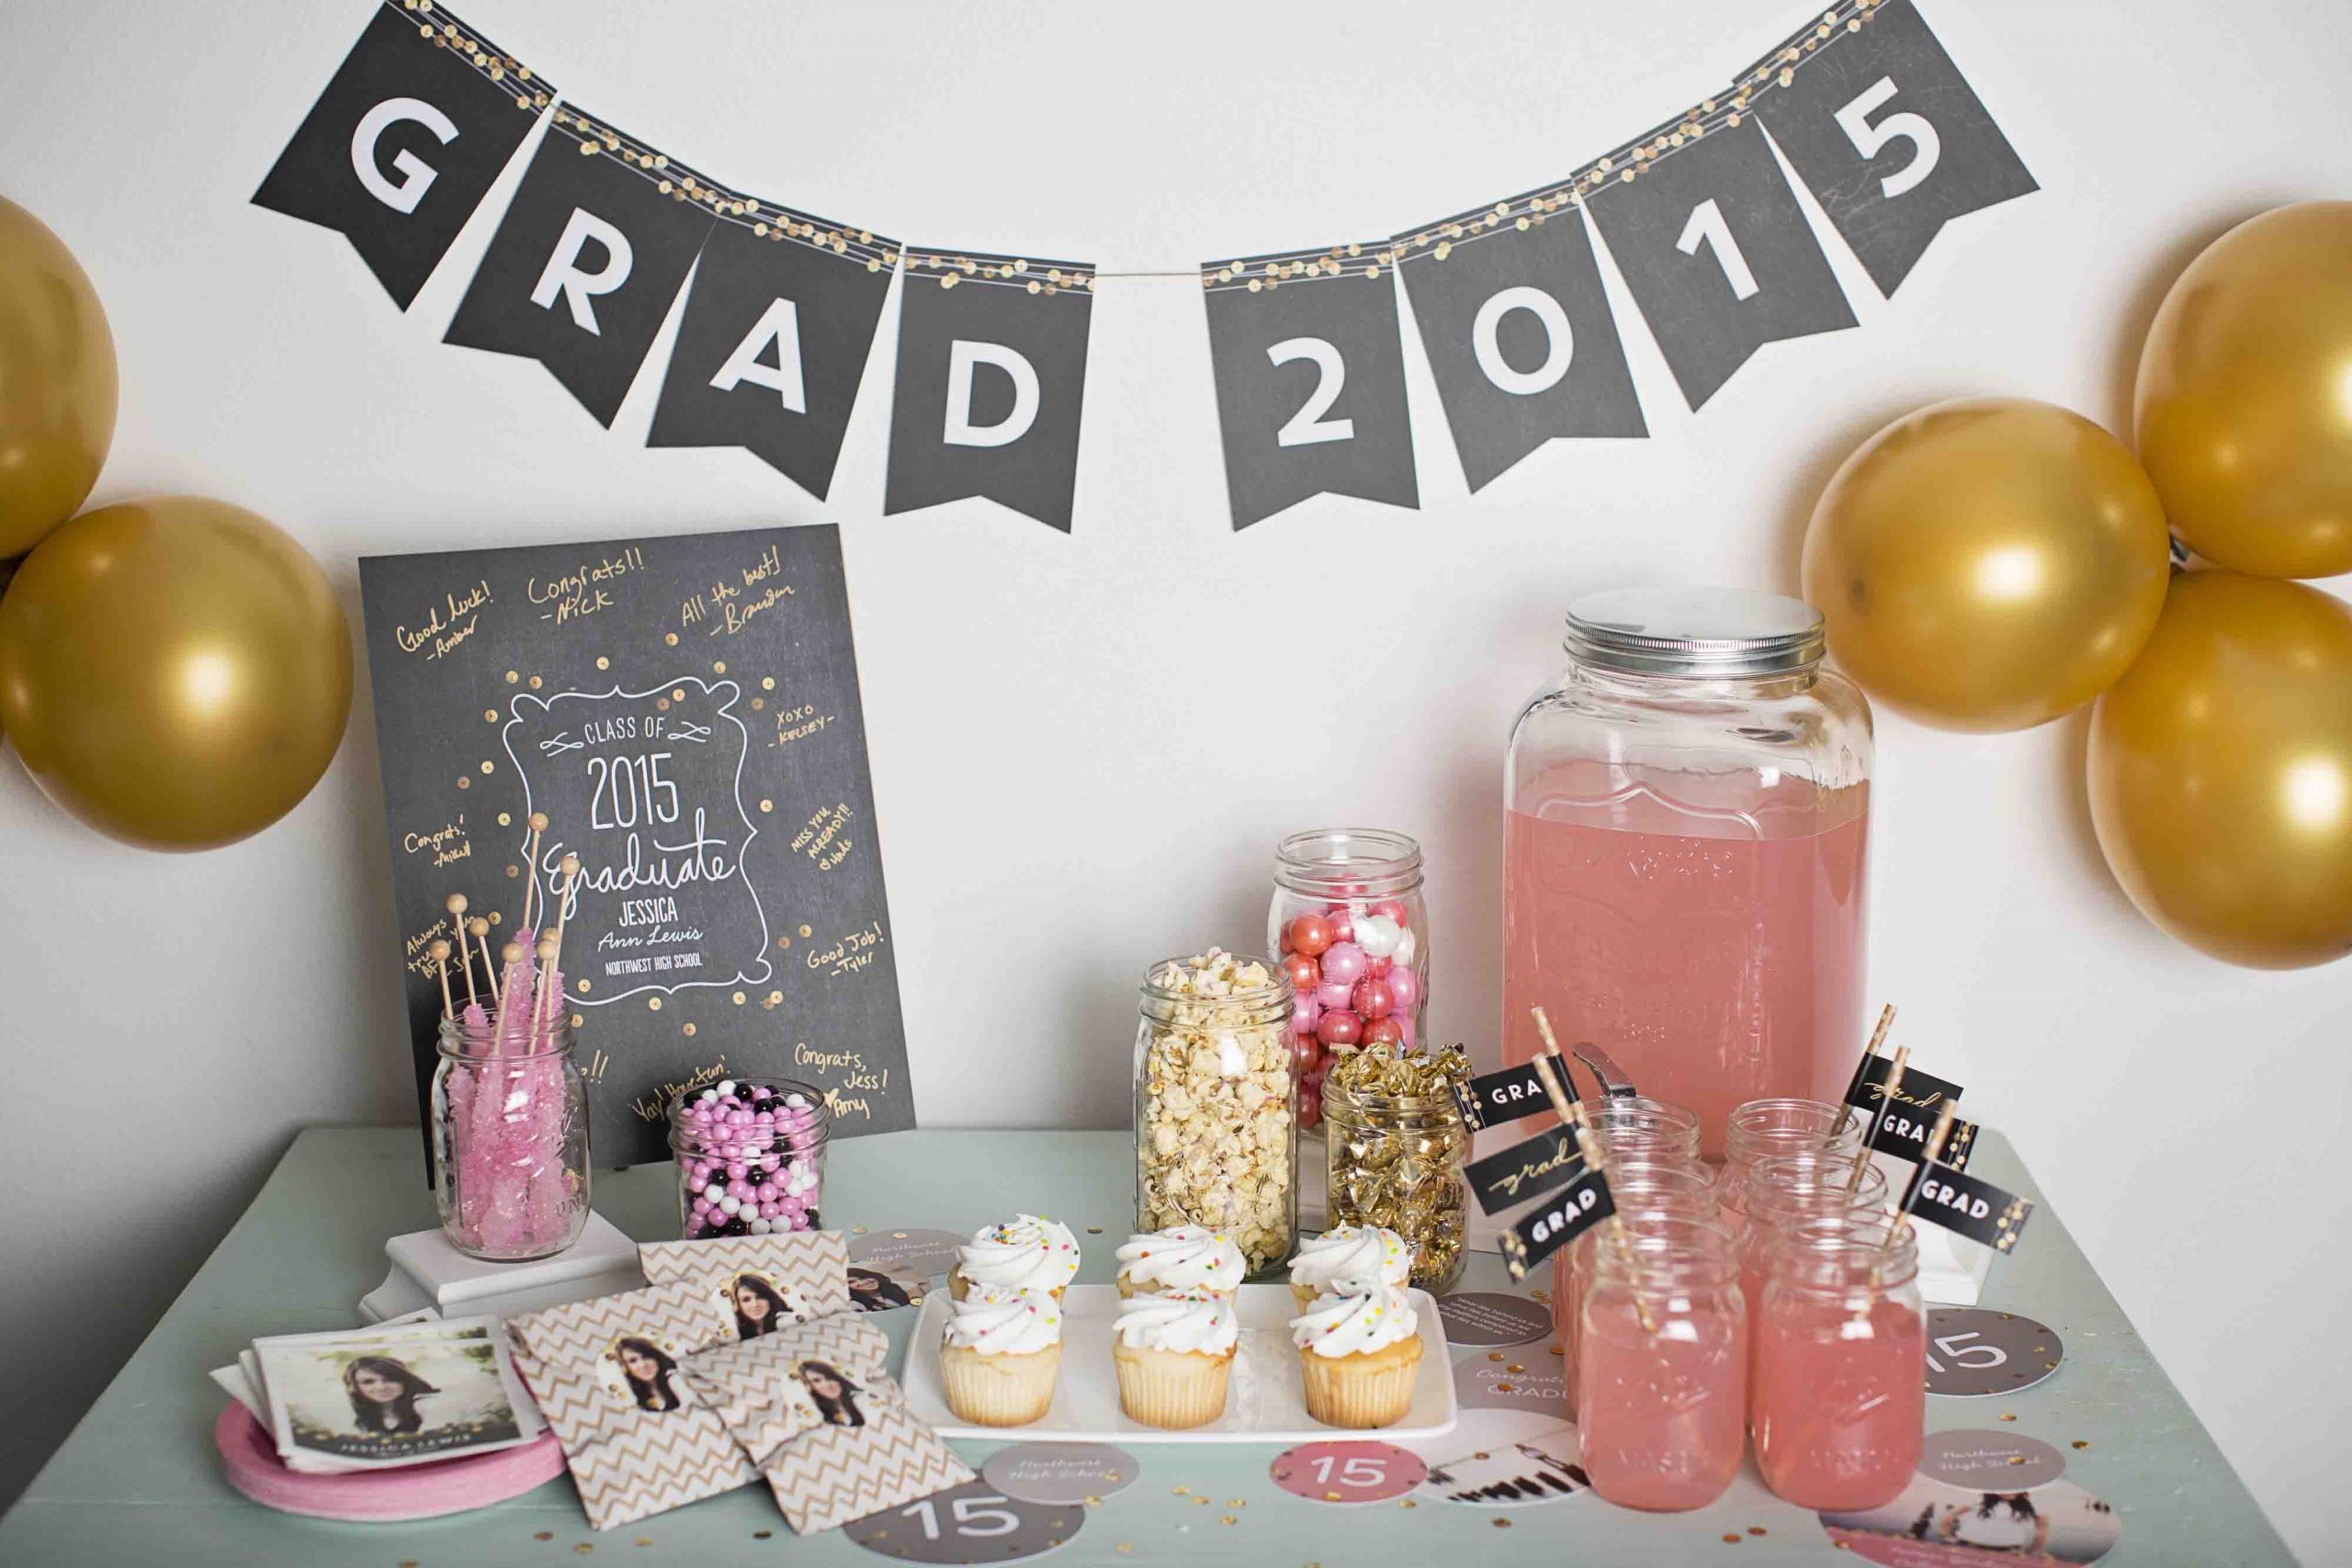 Graduation Party Setup Ideas
 Sequin Inspired Graduation Party Ideas